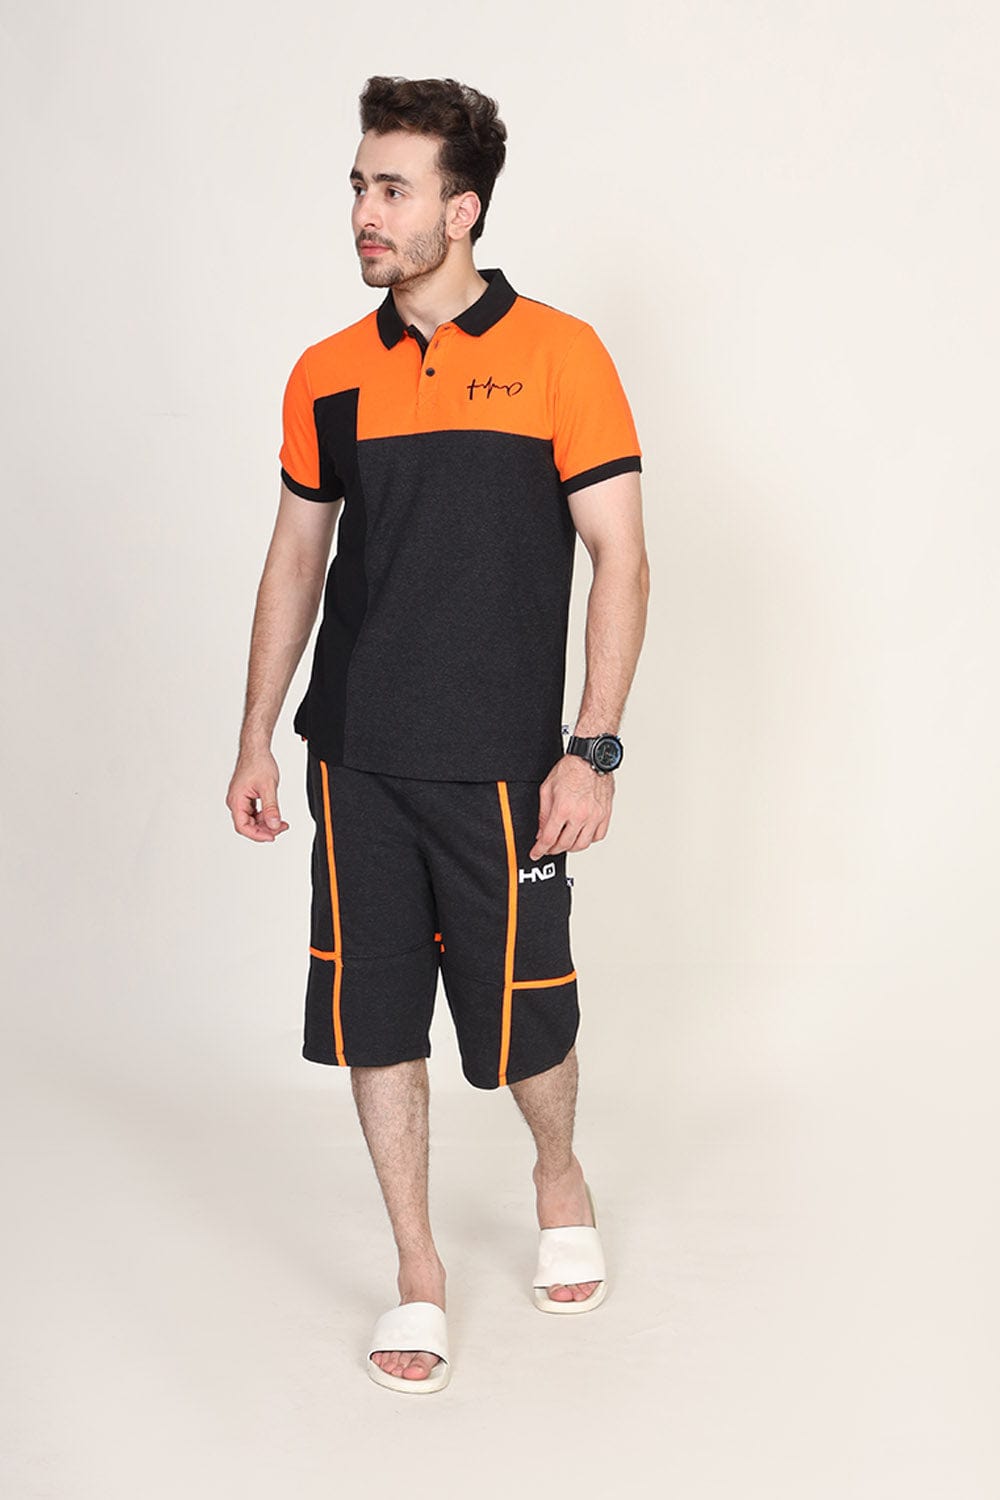 Hope Not Out by Shahid Afridi Men Shorts Man Black Fashion Short With Cont Tape